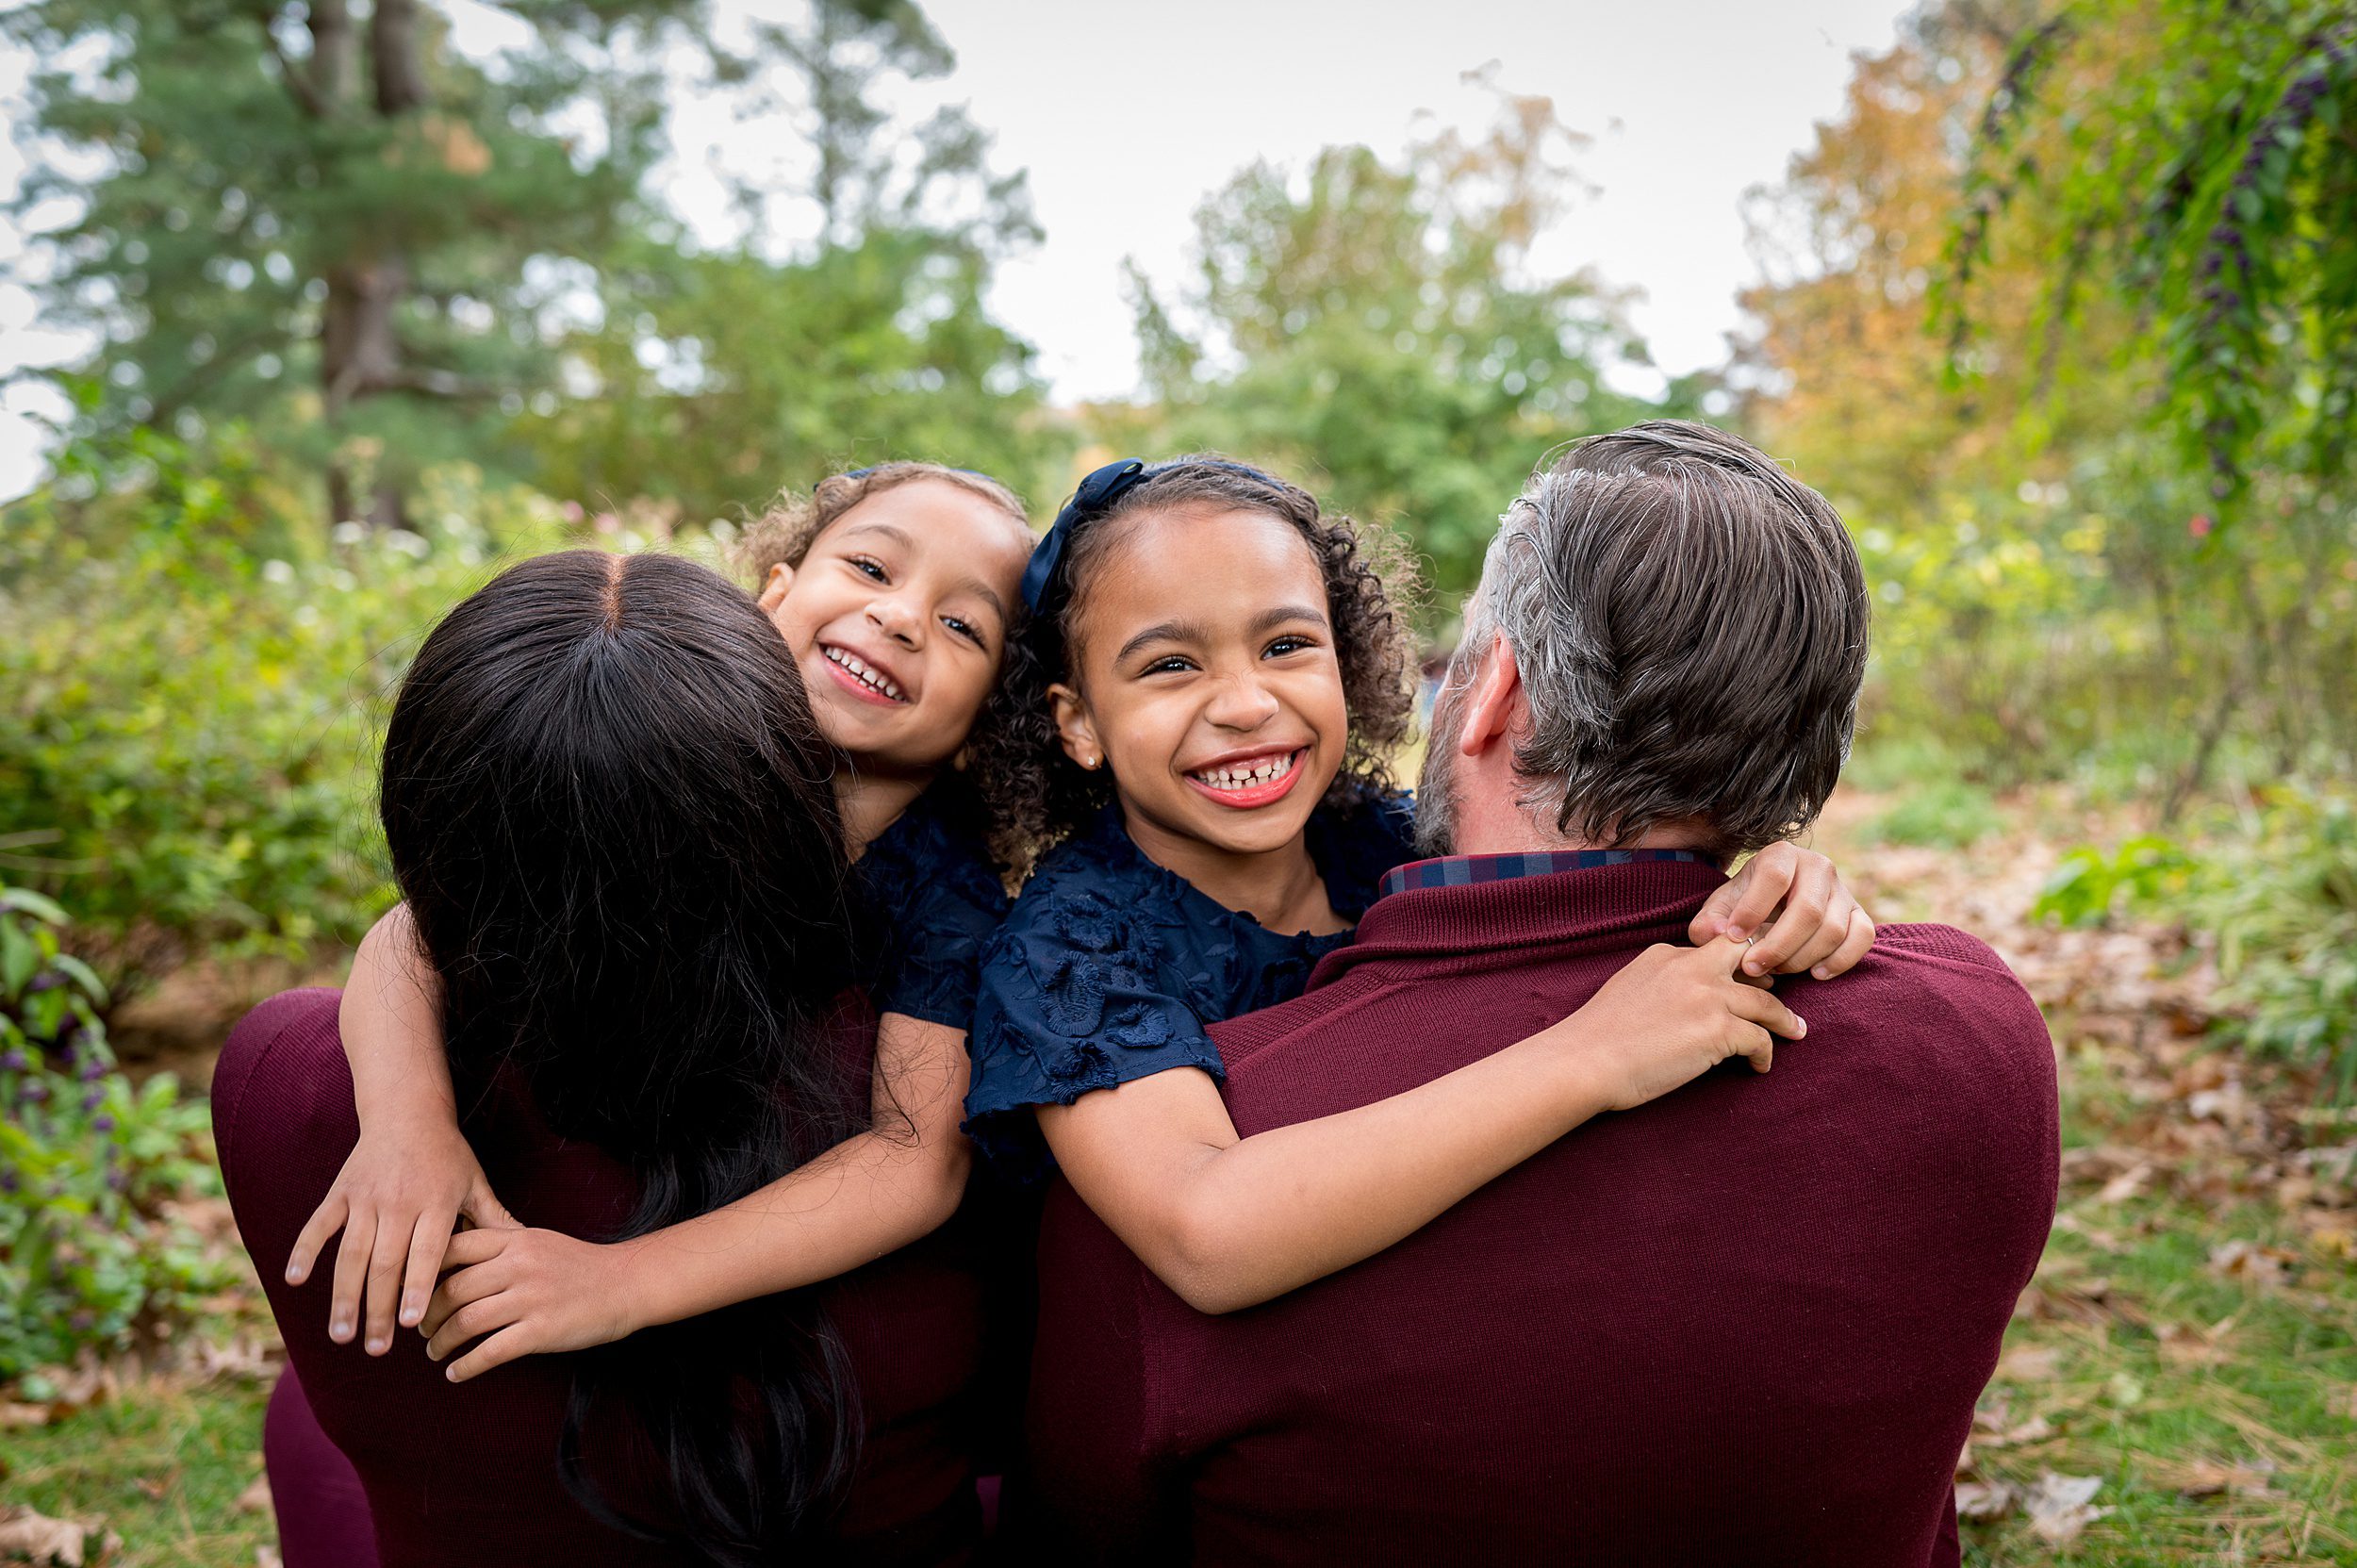 Two young girls climb on and hug their mom and dad in a forest trail wearing matching blue dresses while mom and dad wear maroon sweaters new haven photographer